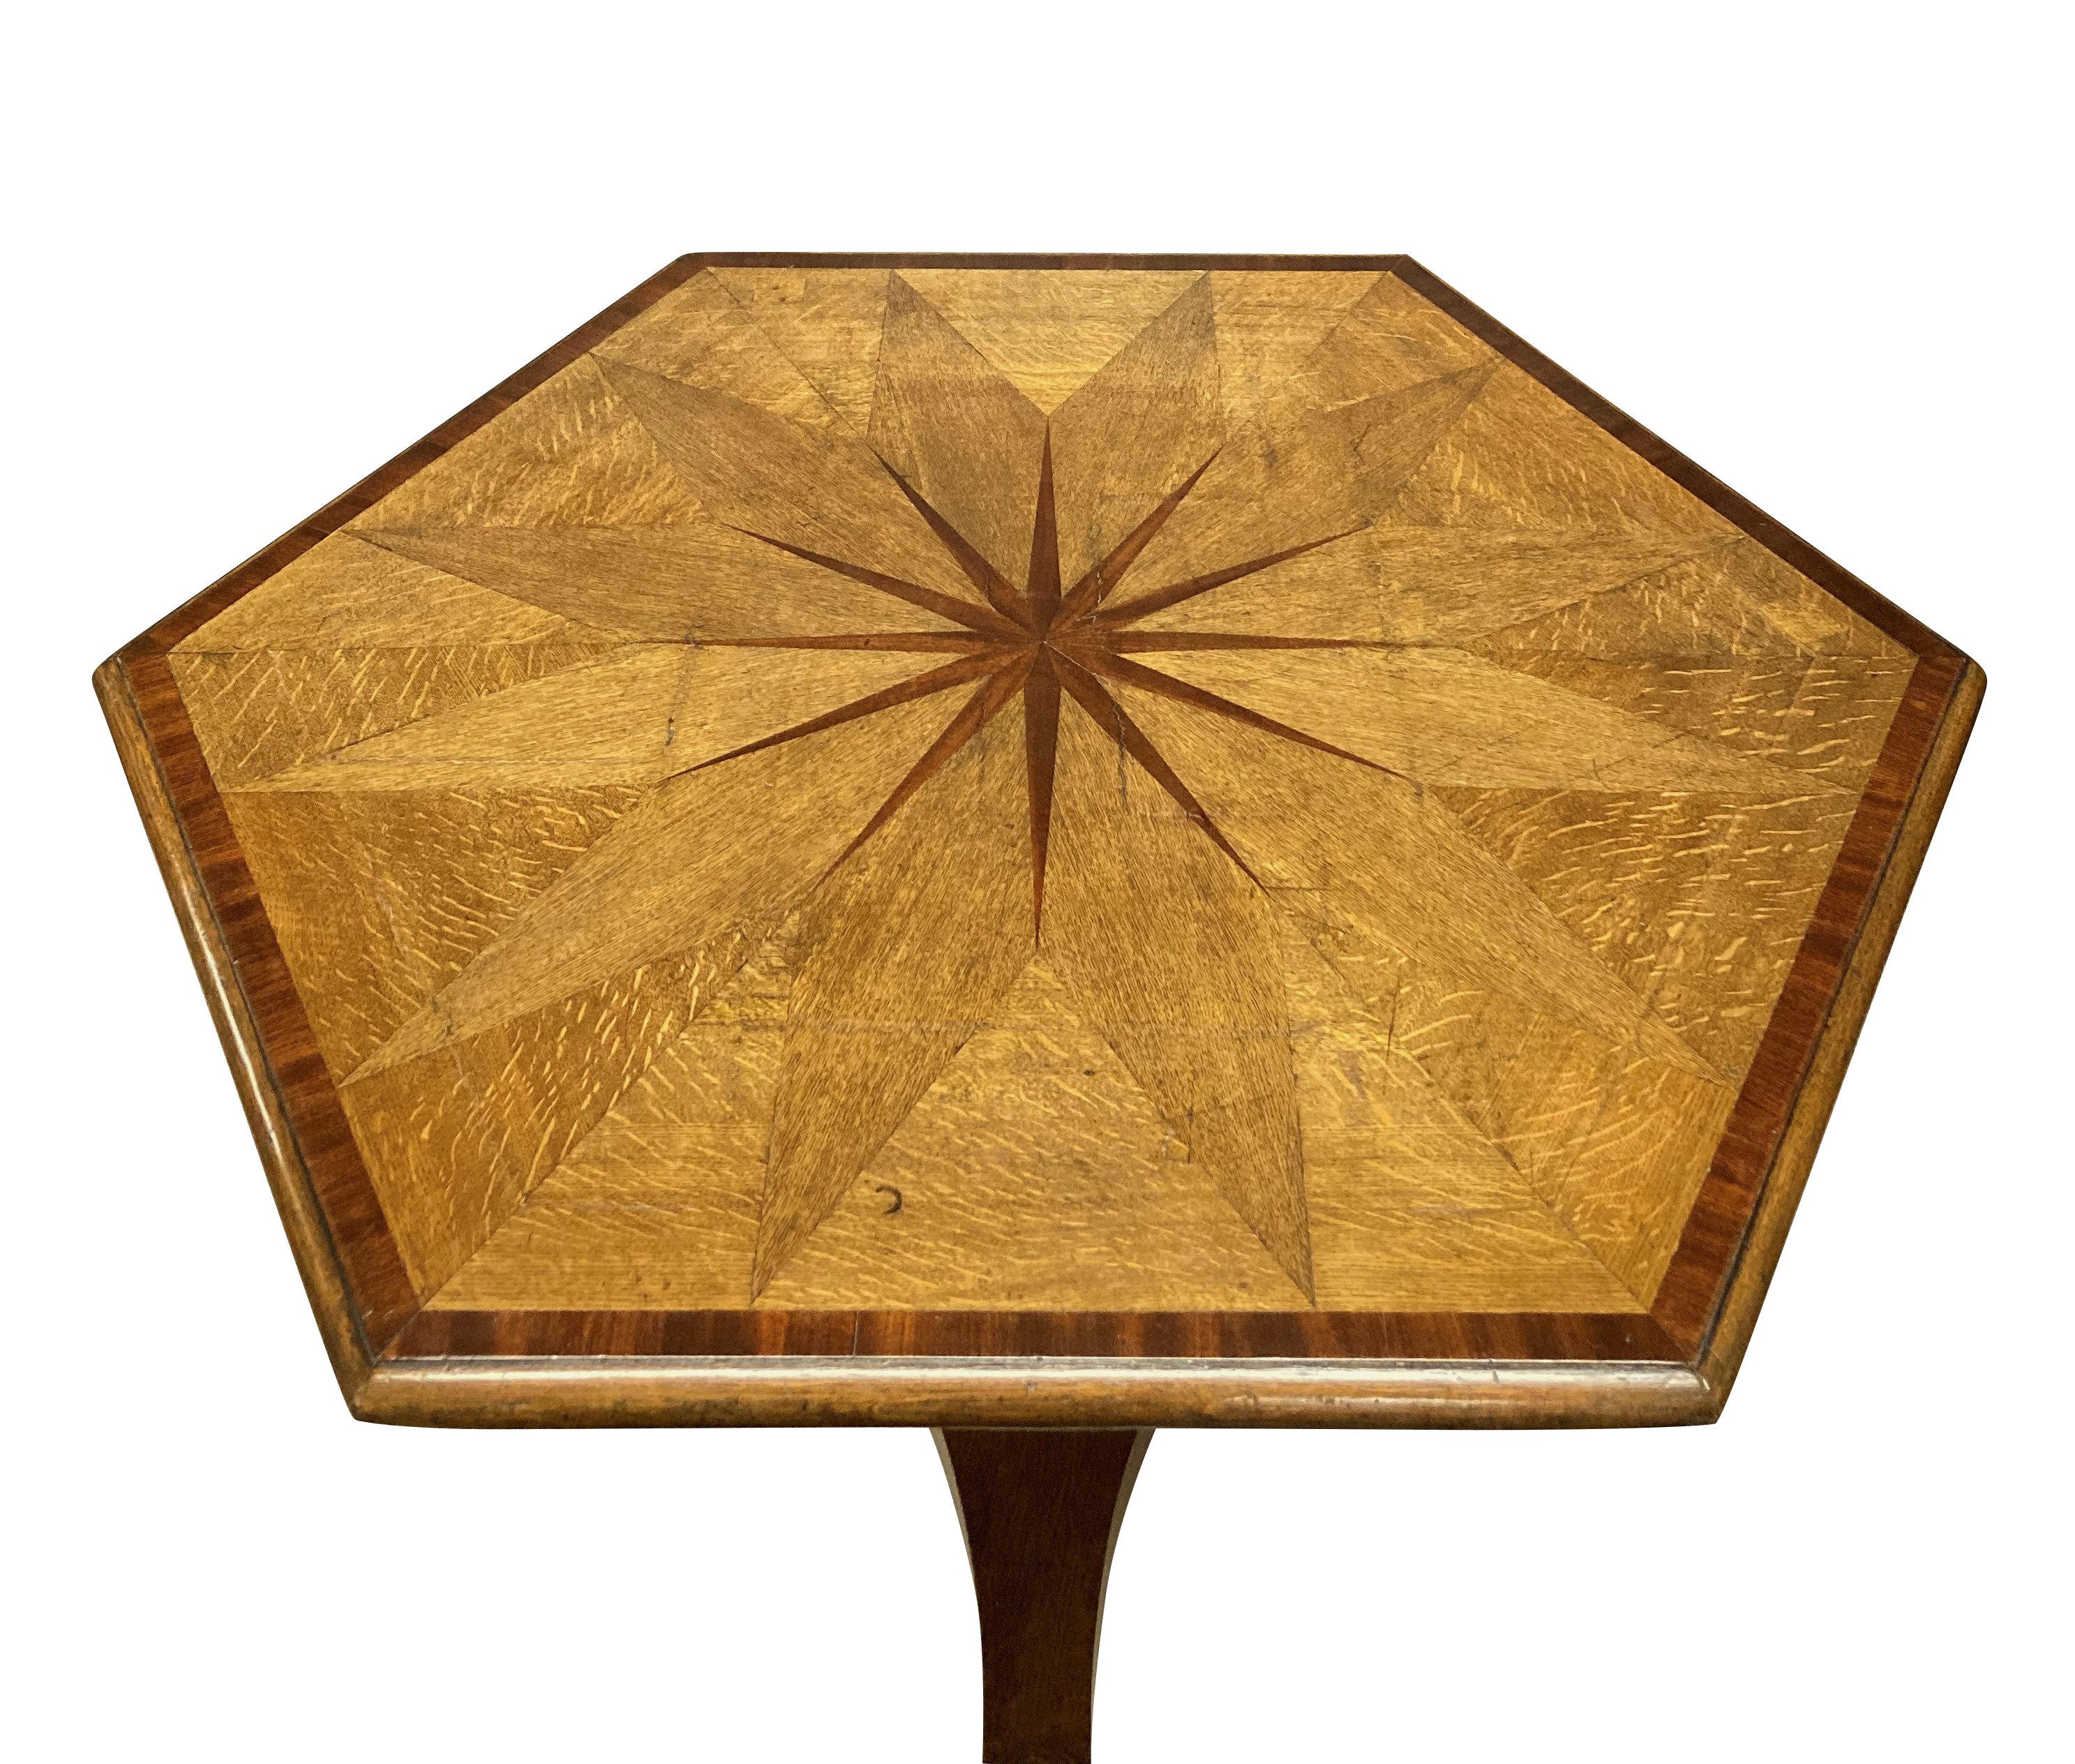 An English William IV hexagonal tilt-top centre or breakfast table. in pale oak, with a geometric design in mahogany. There are some splits to the veneer, as it is in it's original 'Country House' condition. Purchased from Colefax & Fowler of brook